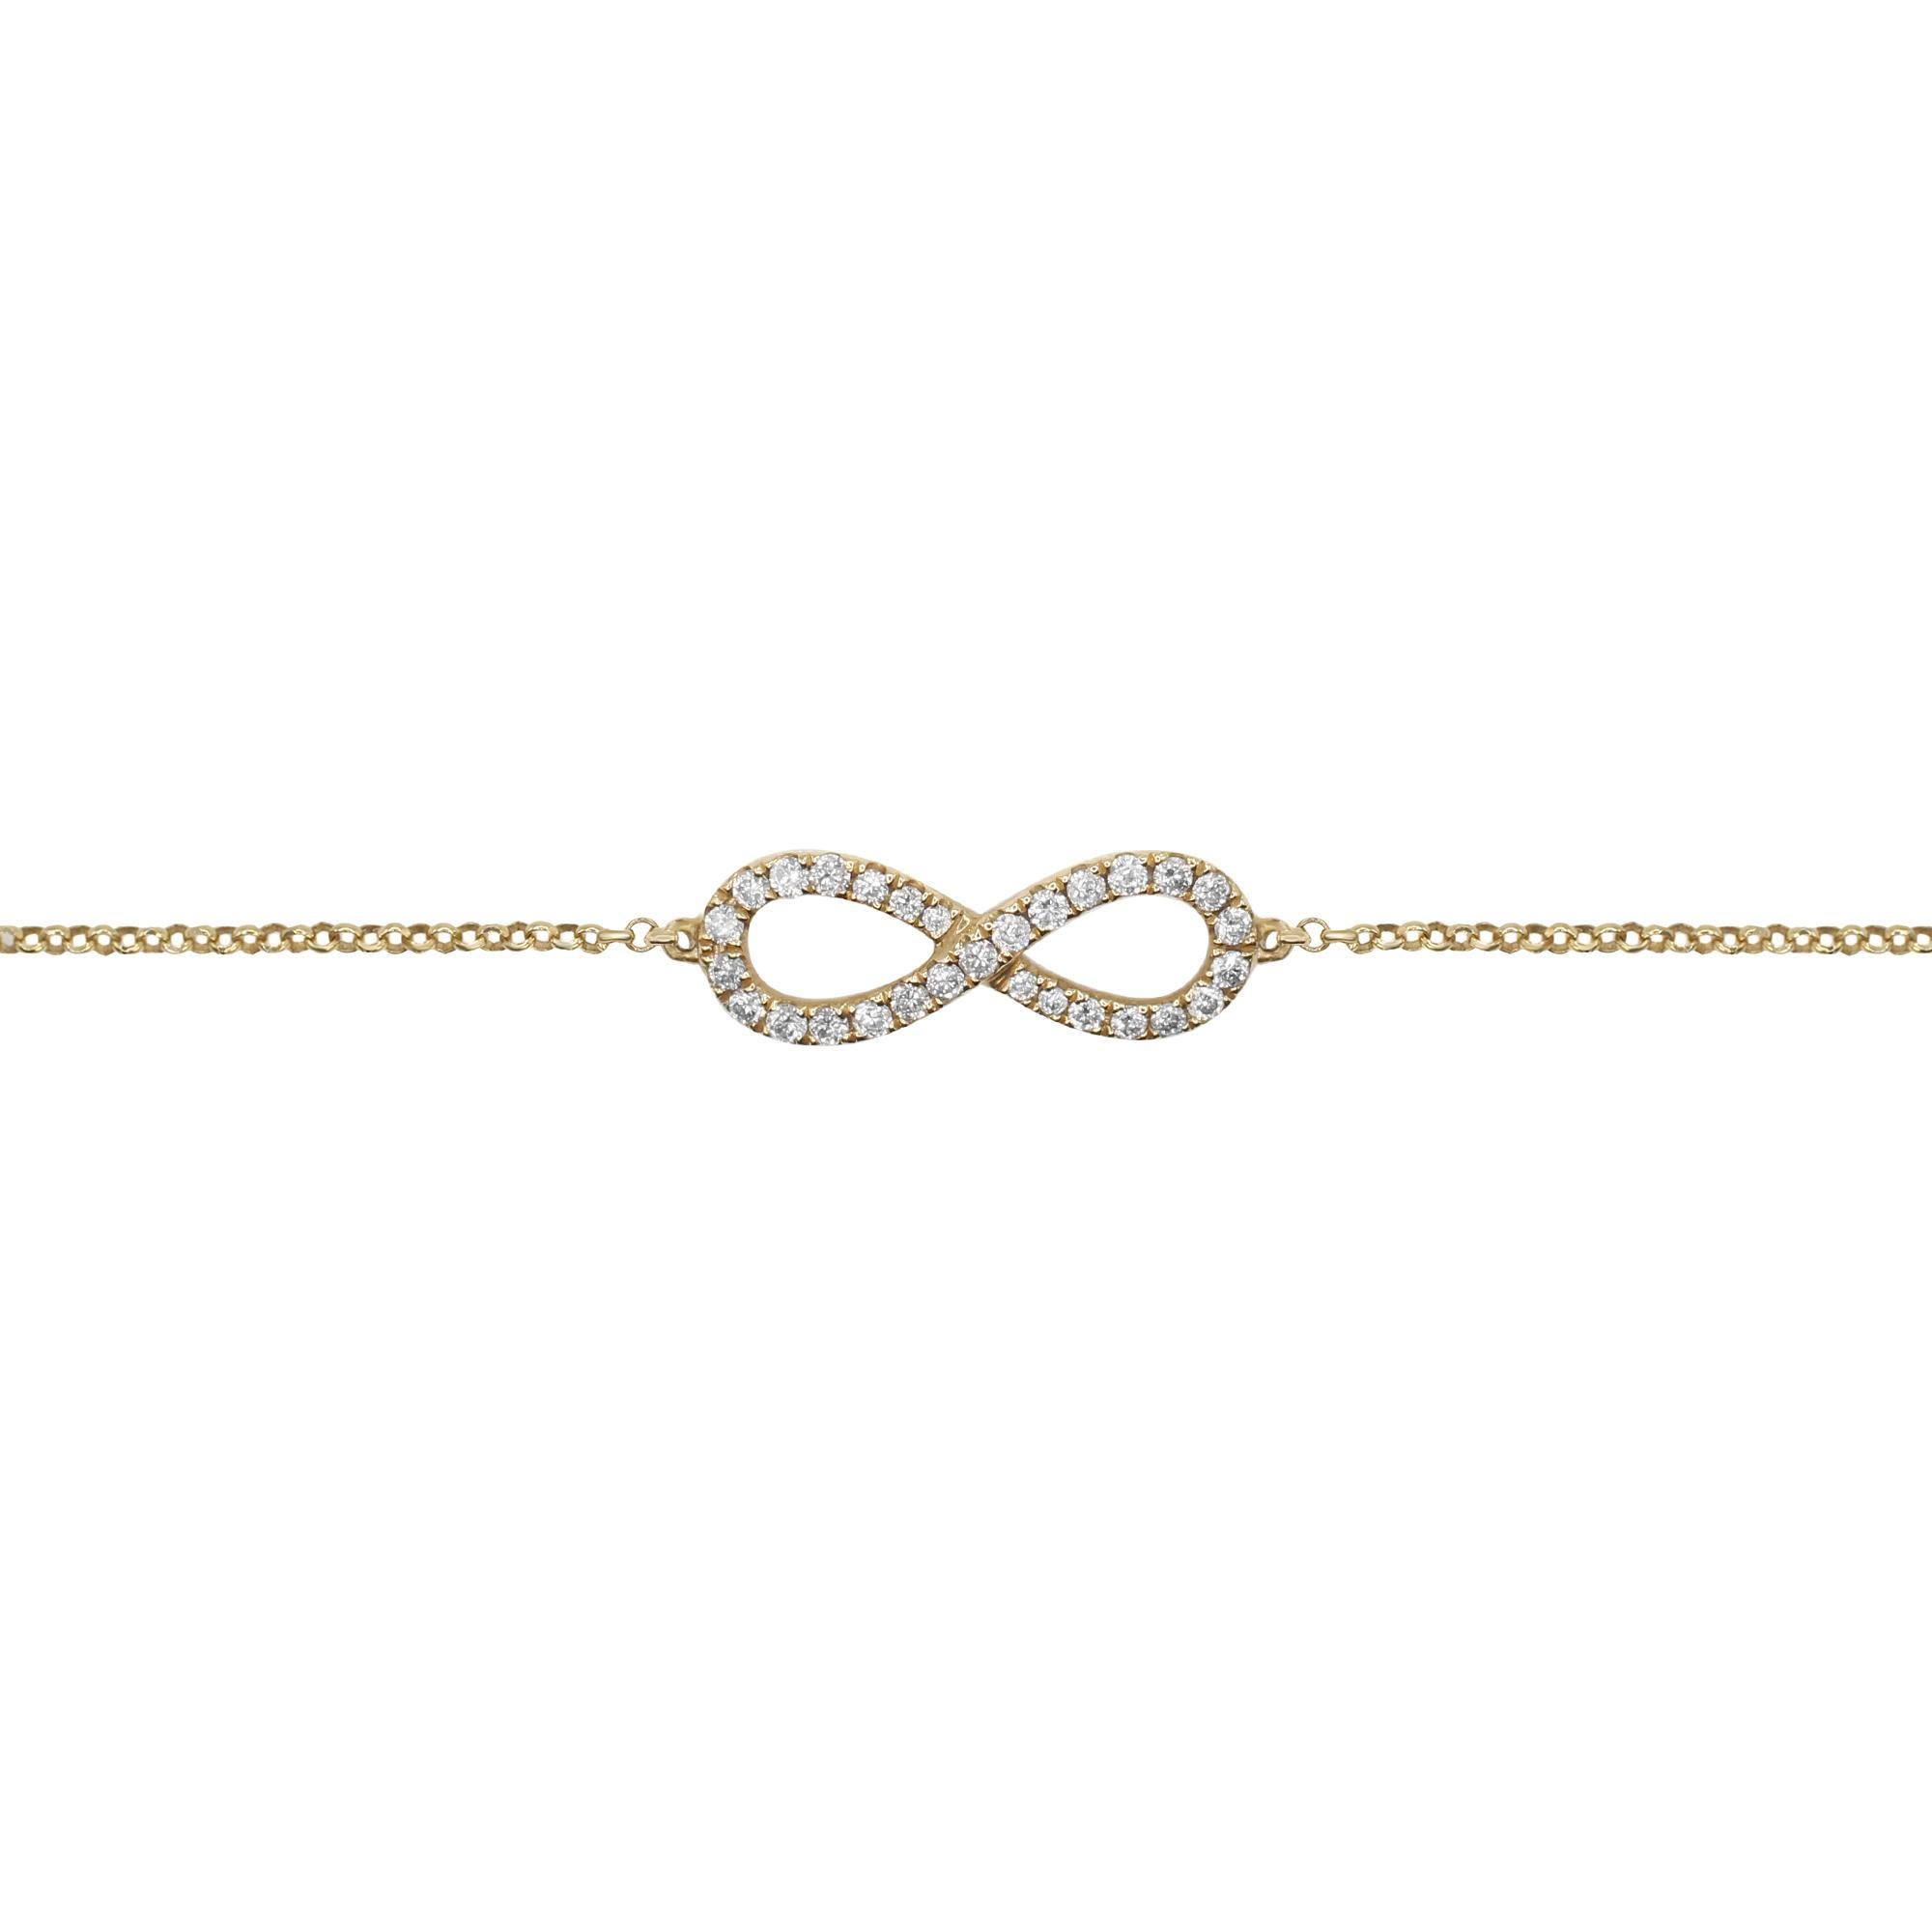 A gorgeous simple diamond bracelet, an Infinity style set with clean and sparkly diamonds. Poids total en carats : 0.25. Diamond color G-H and SI1 clarity. 
Made with 14K Yellow Gold. Bracelet length: 7.25. Comes with a presentable gift box and